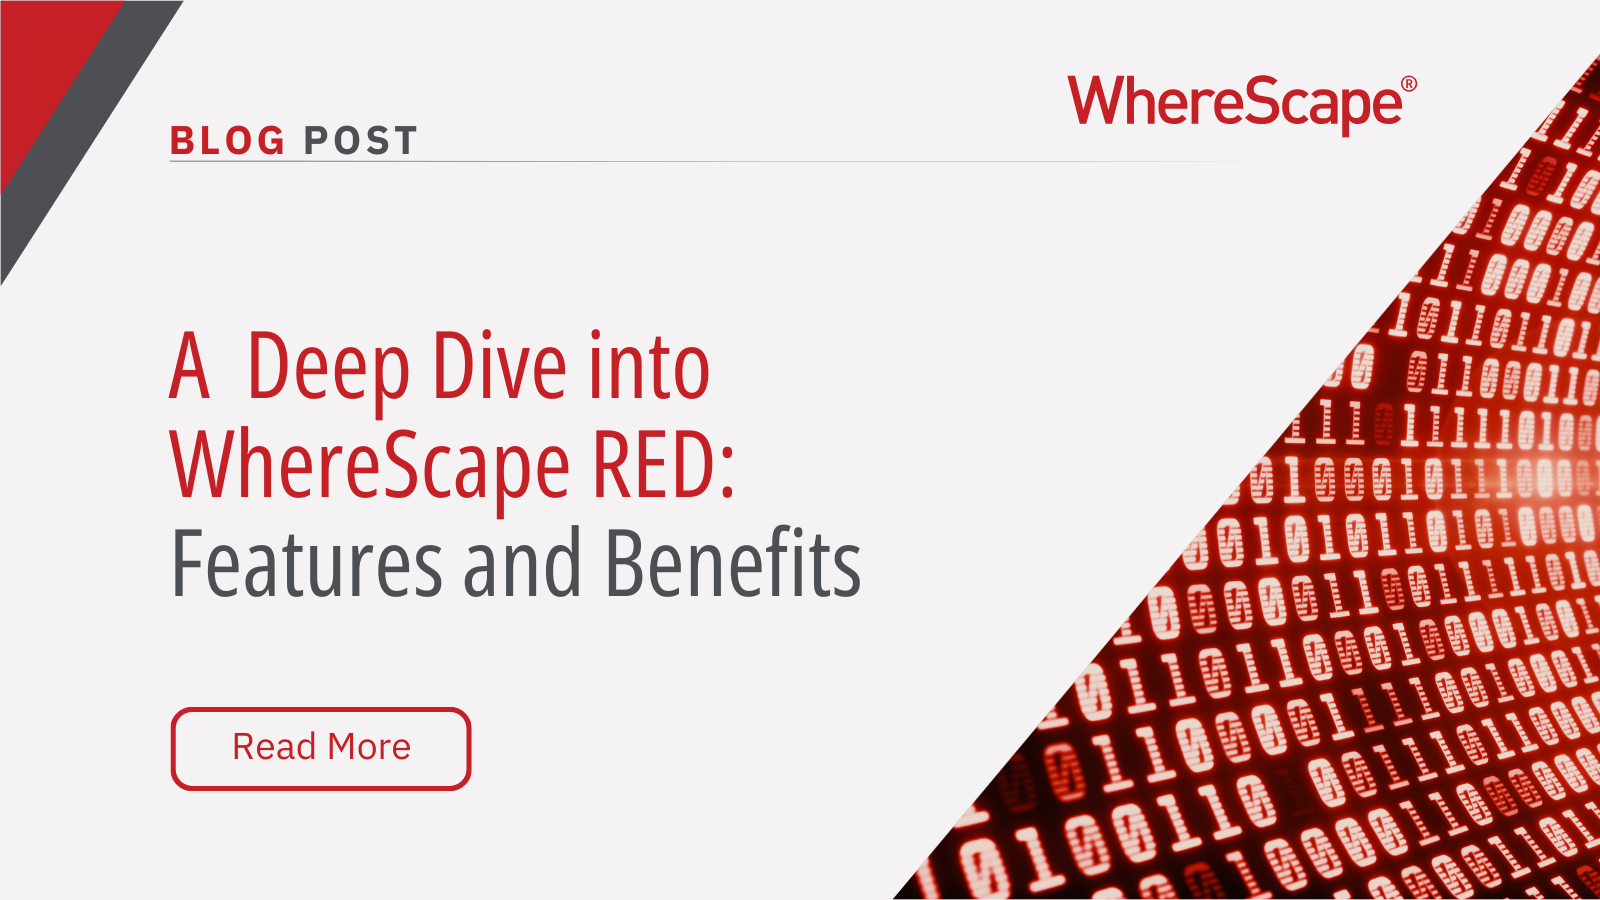 Deep Dive into WhereScape RED: Features and Benefits